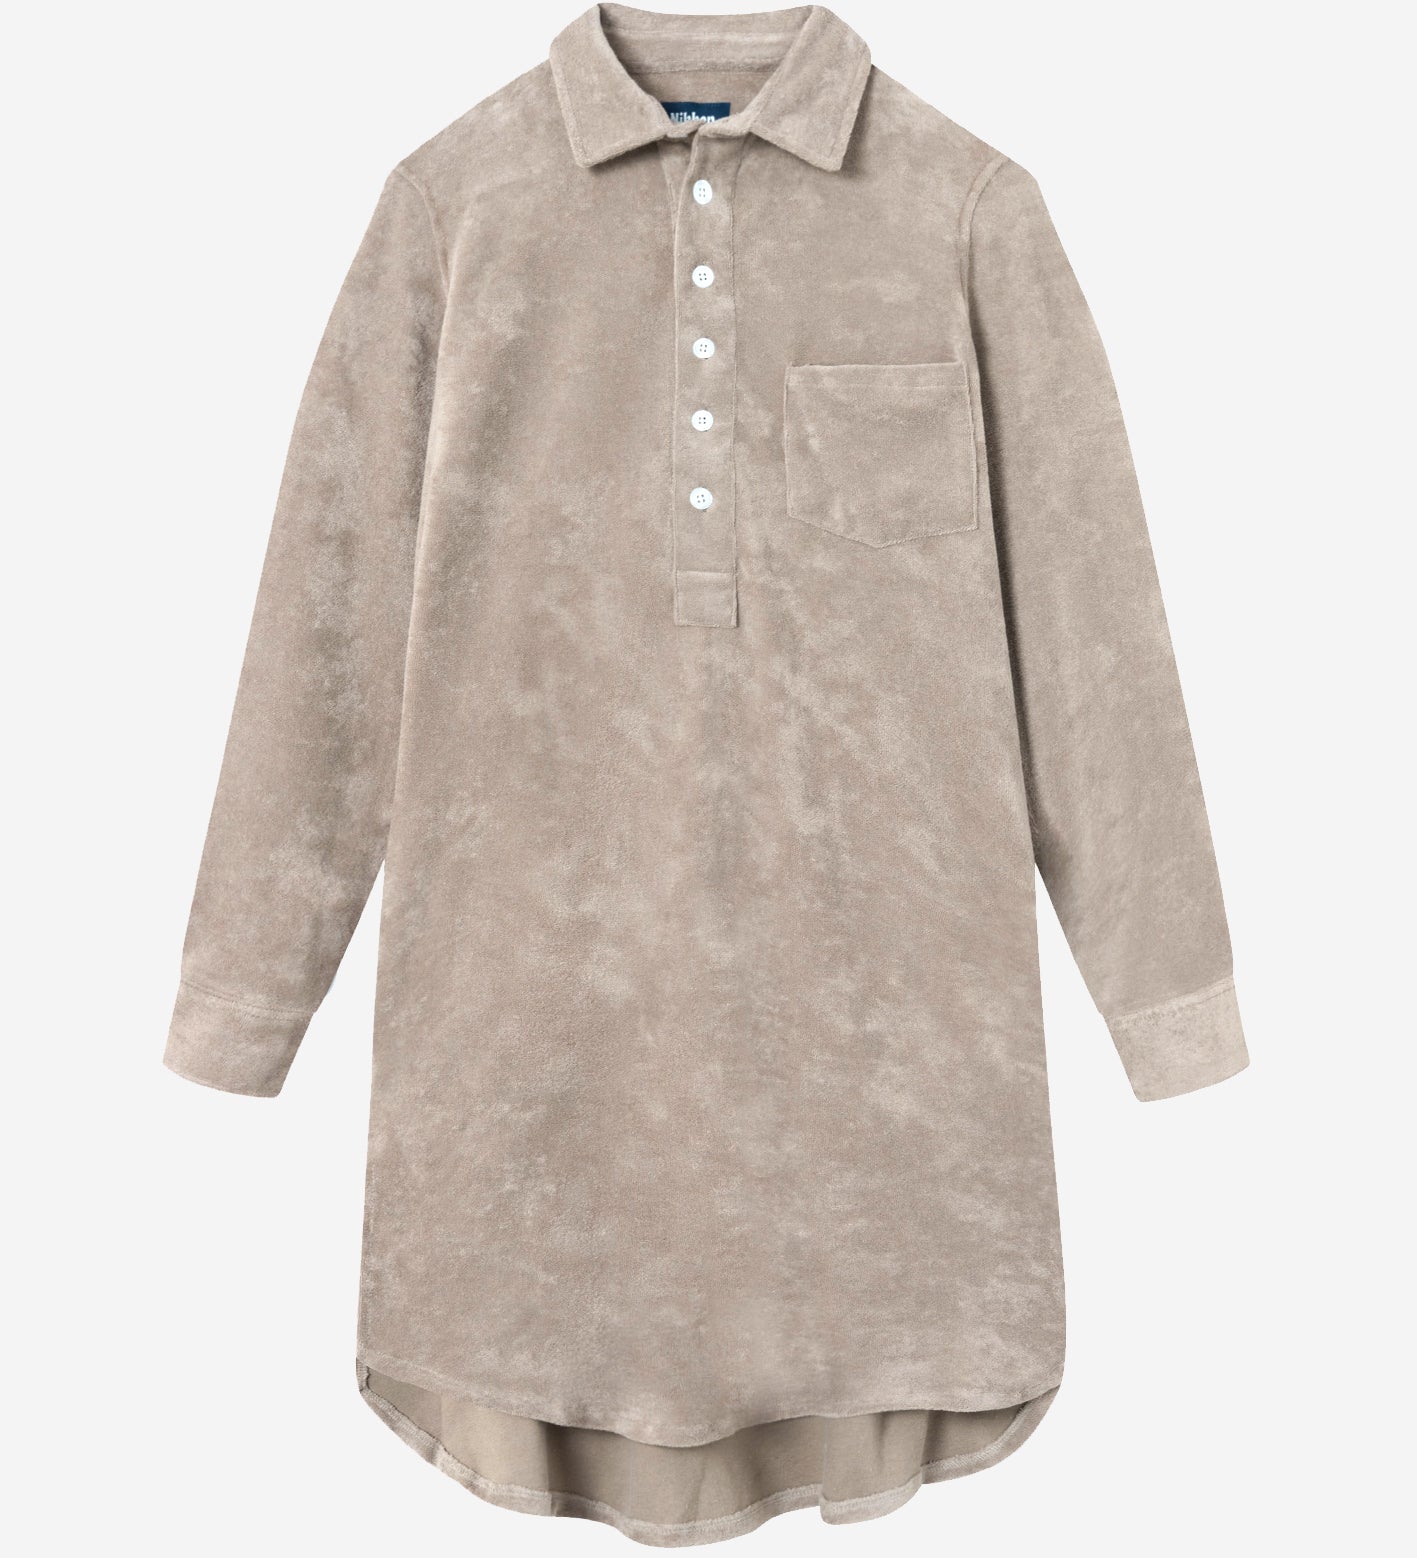 Long shirt in cashmere beige color